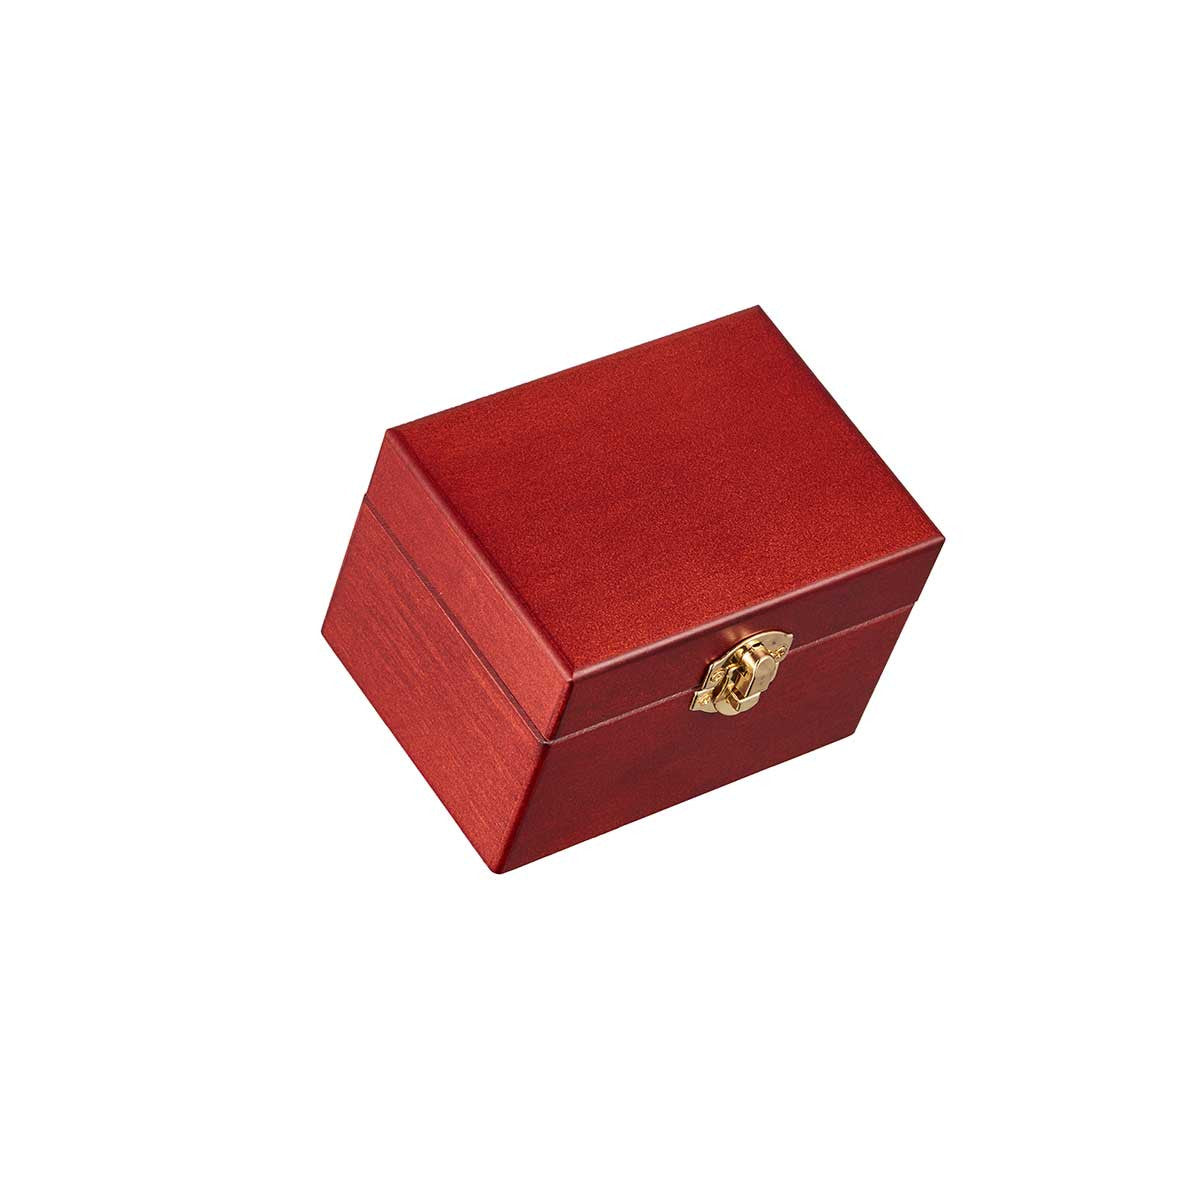 Download Wooden Storage Box For 6 Essential Oils Organic Aromas